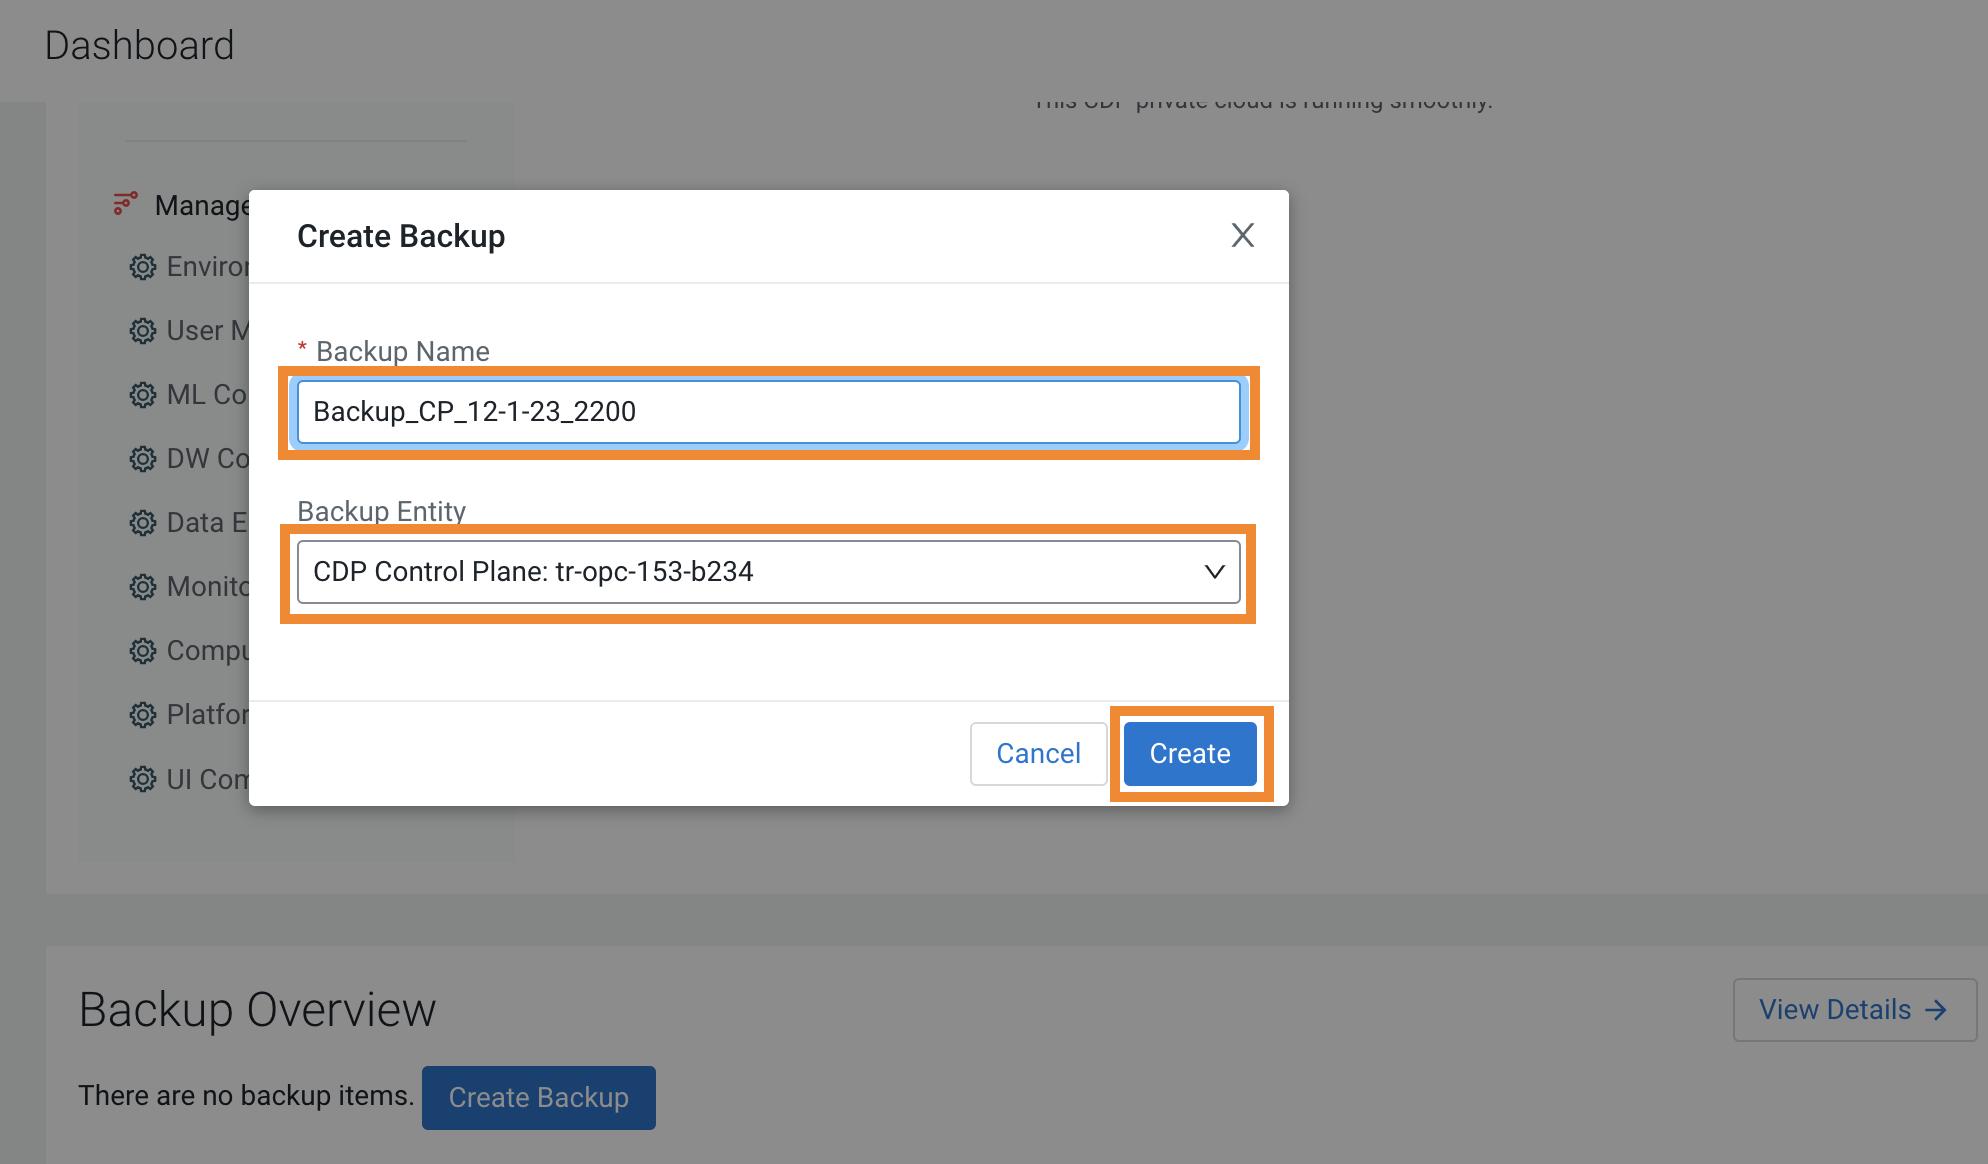 The sample image shows the Create Backup modal window where you enter a backup name, choose the backup entity, and click create to create a backup.